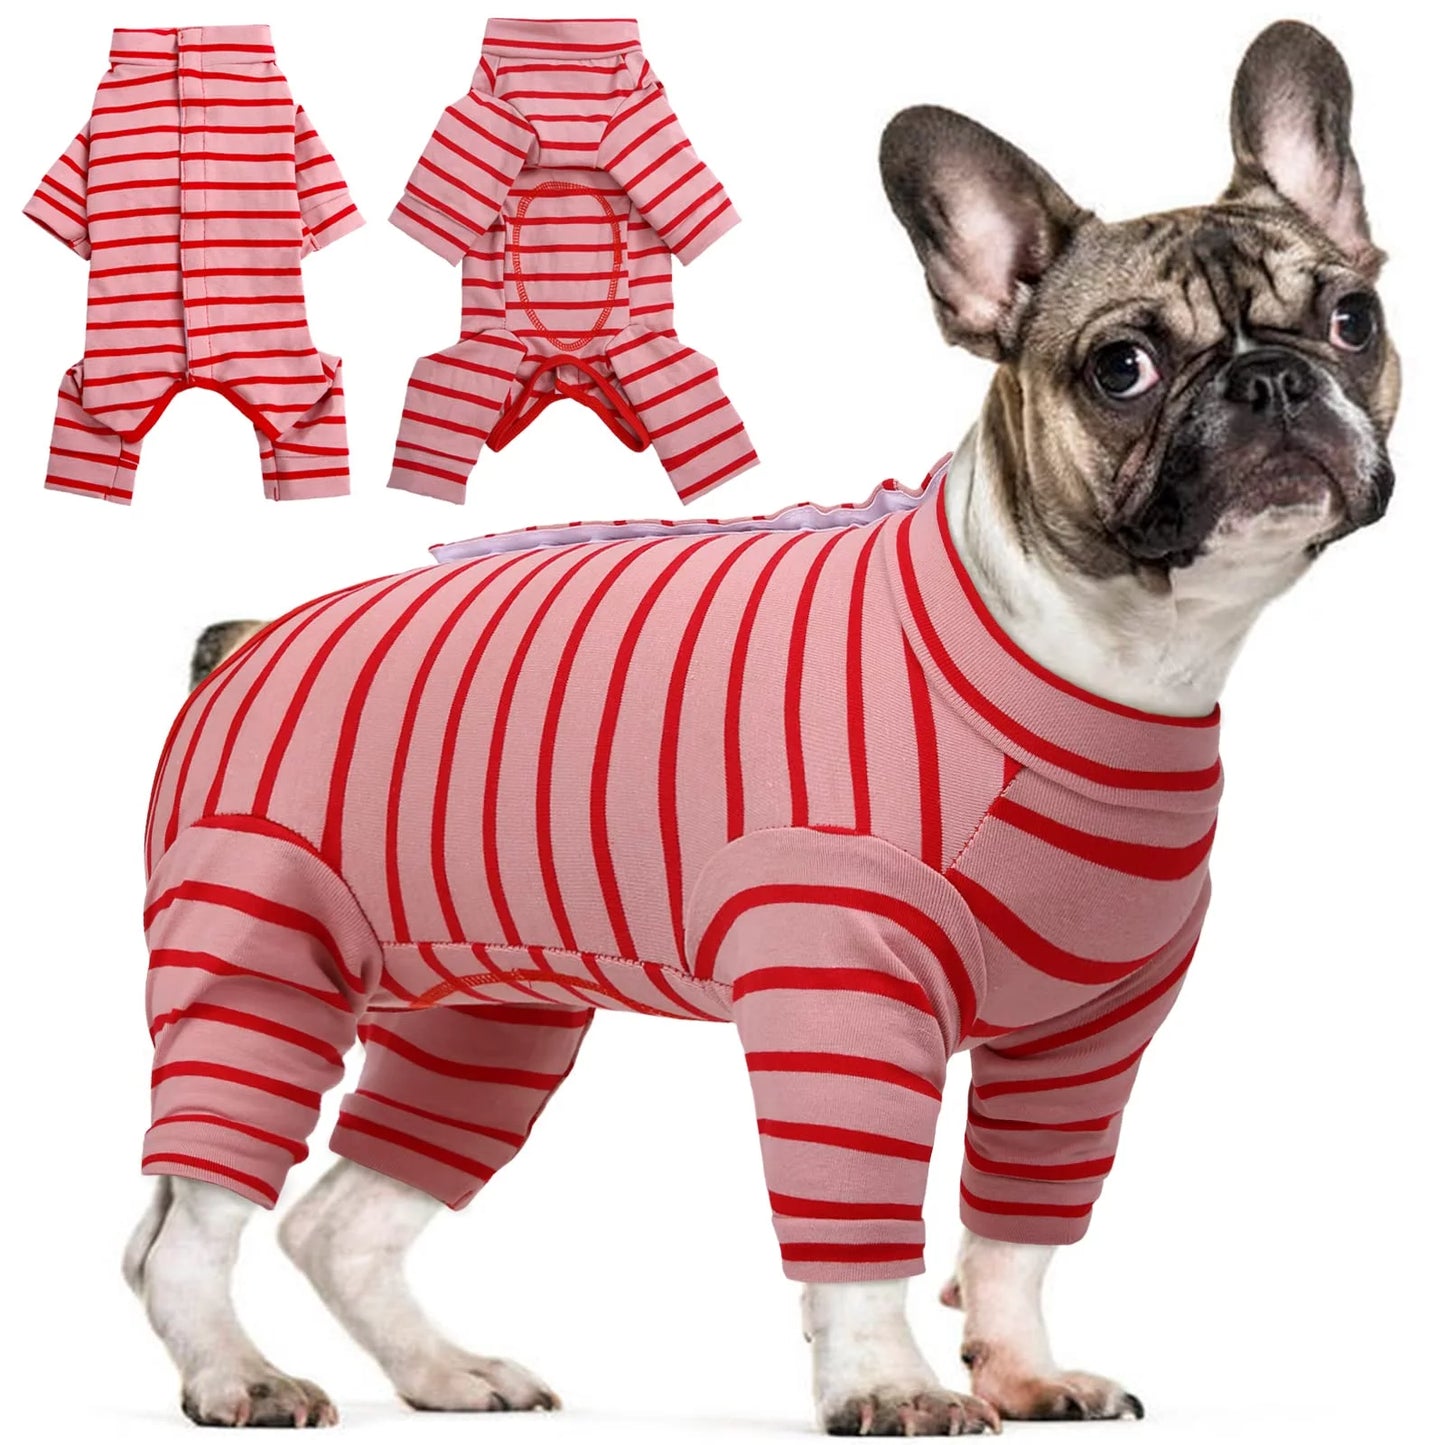 ROZKITCH Dog Onesie Recovery Suit, Puppy after Surgery Long Sleeve Shirt for Shedding Skin Disease Wound Protection, Pet Pajamas Anti-Licking Cone Alternative for Small Medium Cats Dogs